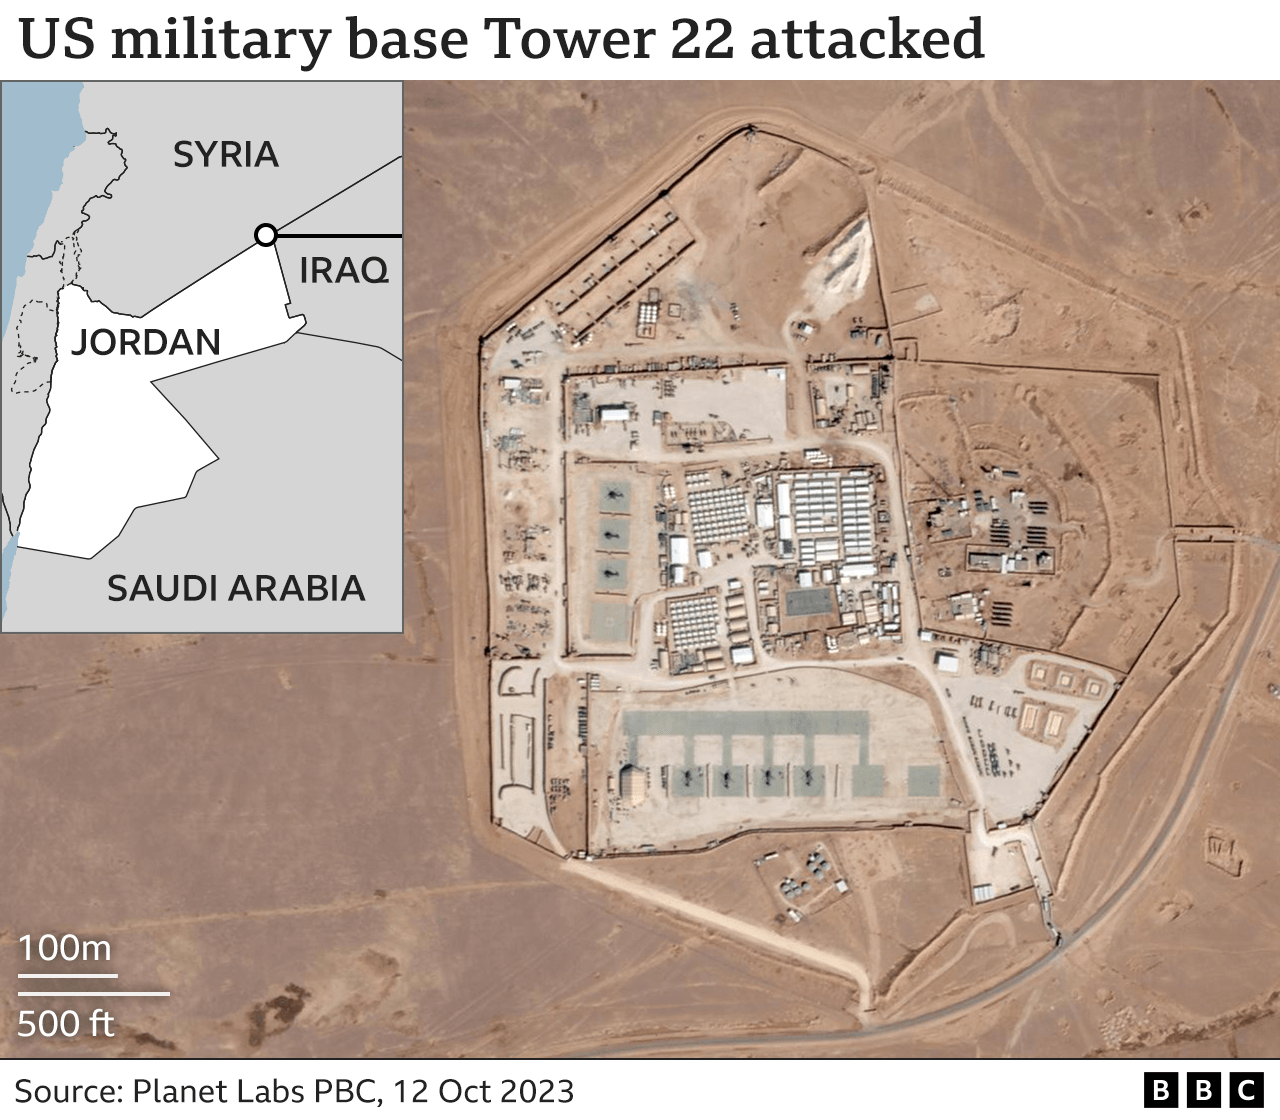 Map showing location of Tower 22, a US military base near Jordan's border with Syria